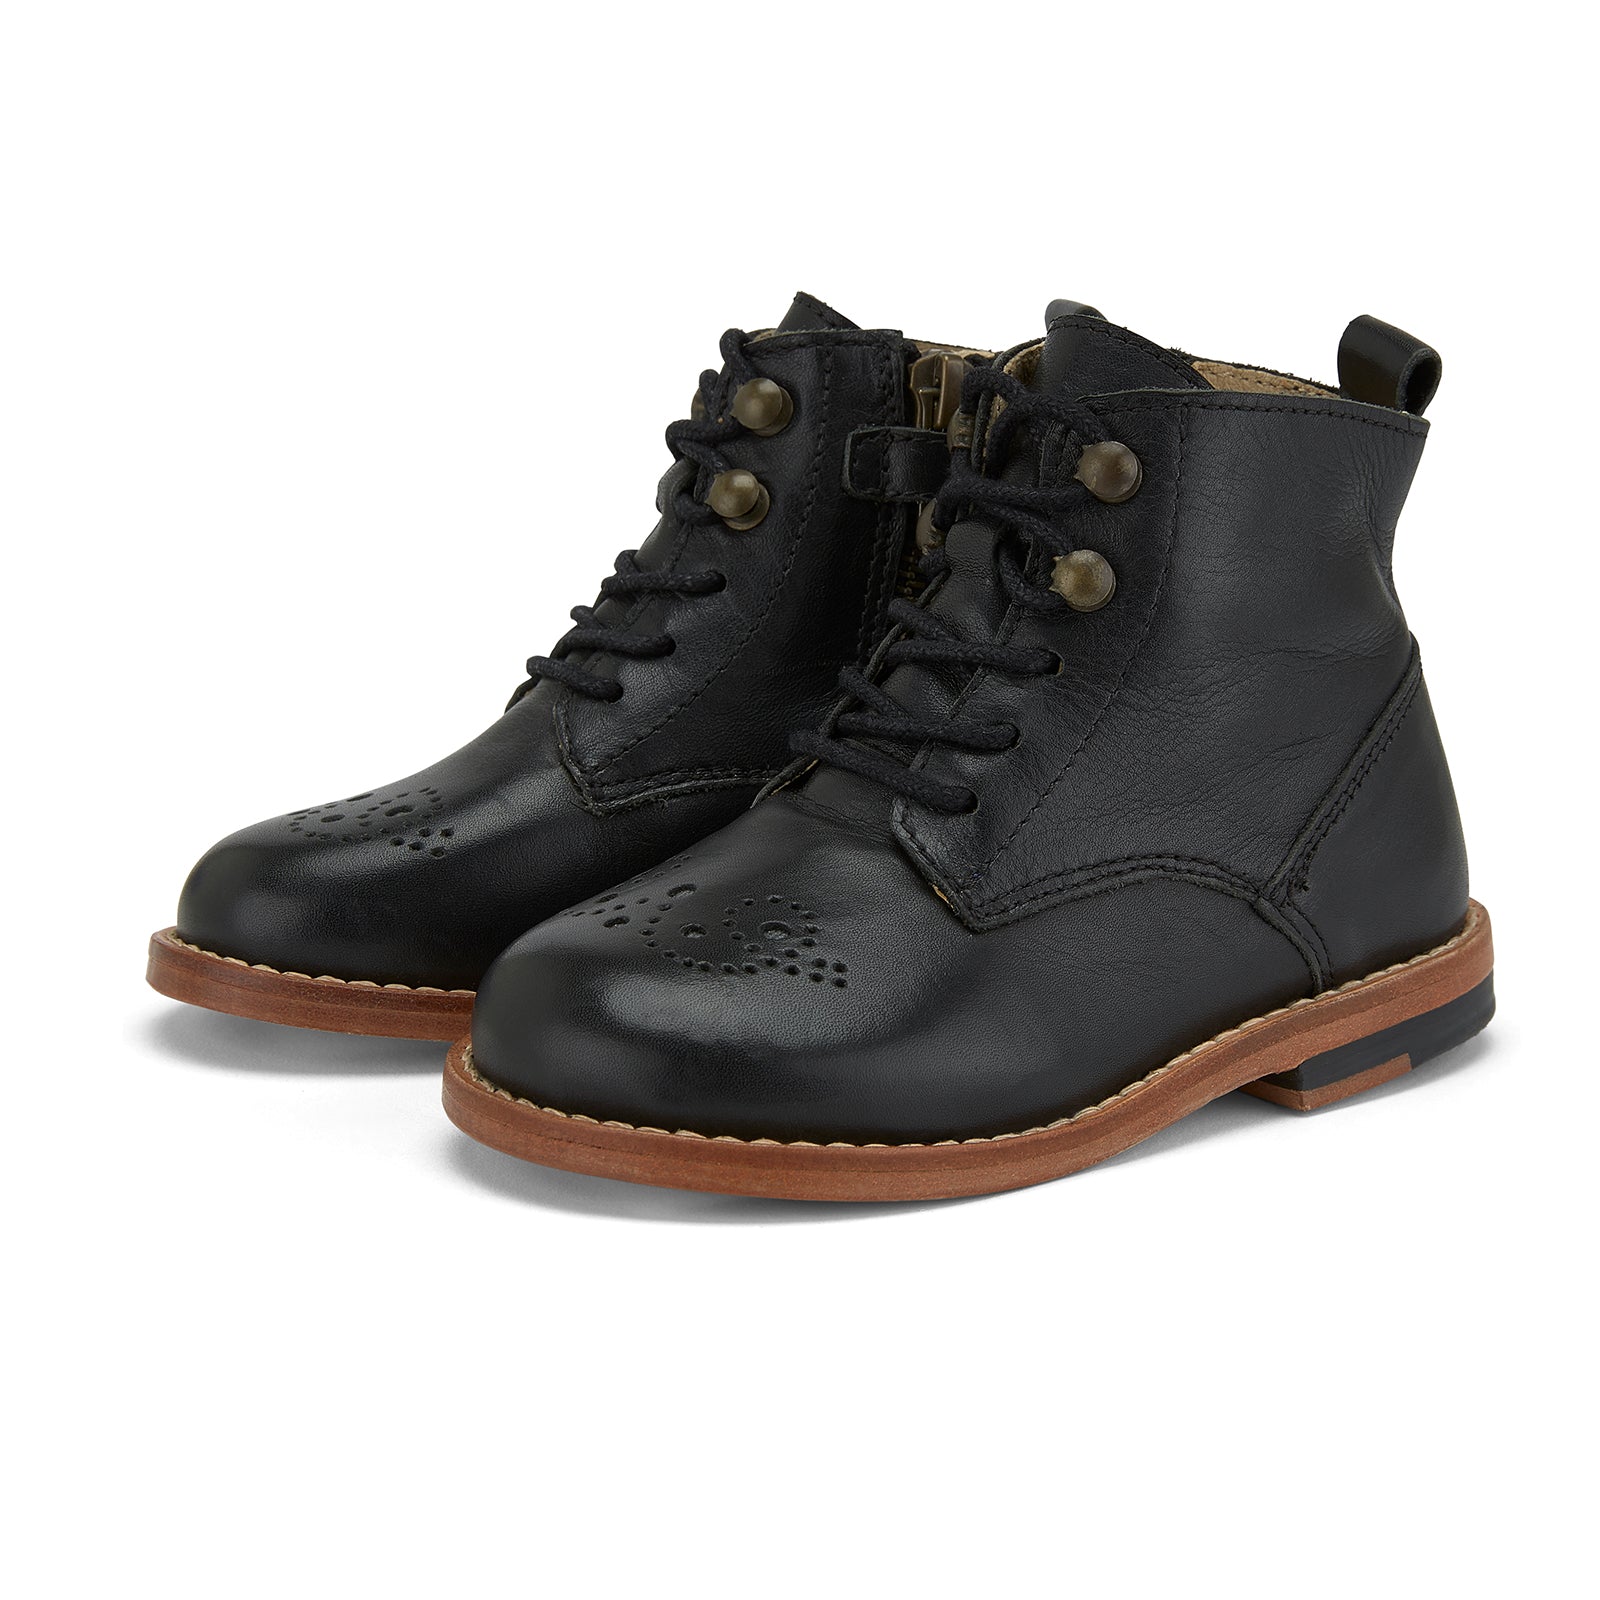 Young Soles Buster Brogue Black Leather Boots